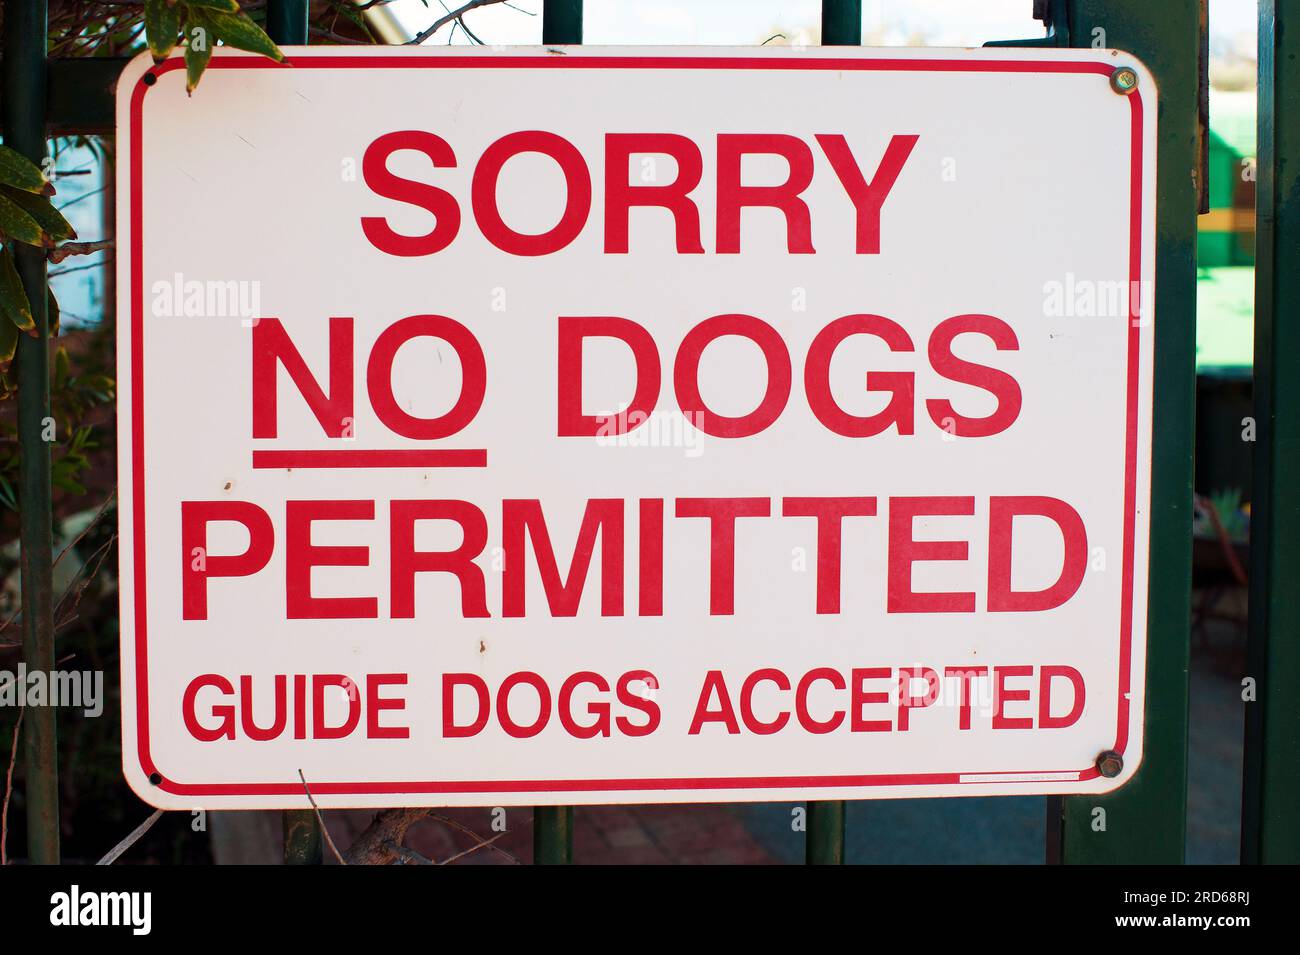 Sorry No dogs permitted sign with grammatical error in text; 'accepted' should be ' excepted' Stock Photo